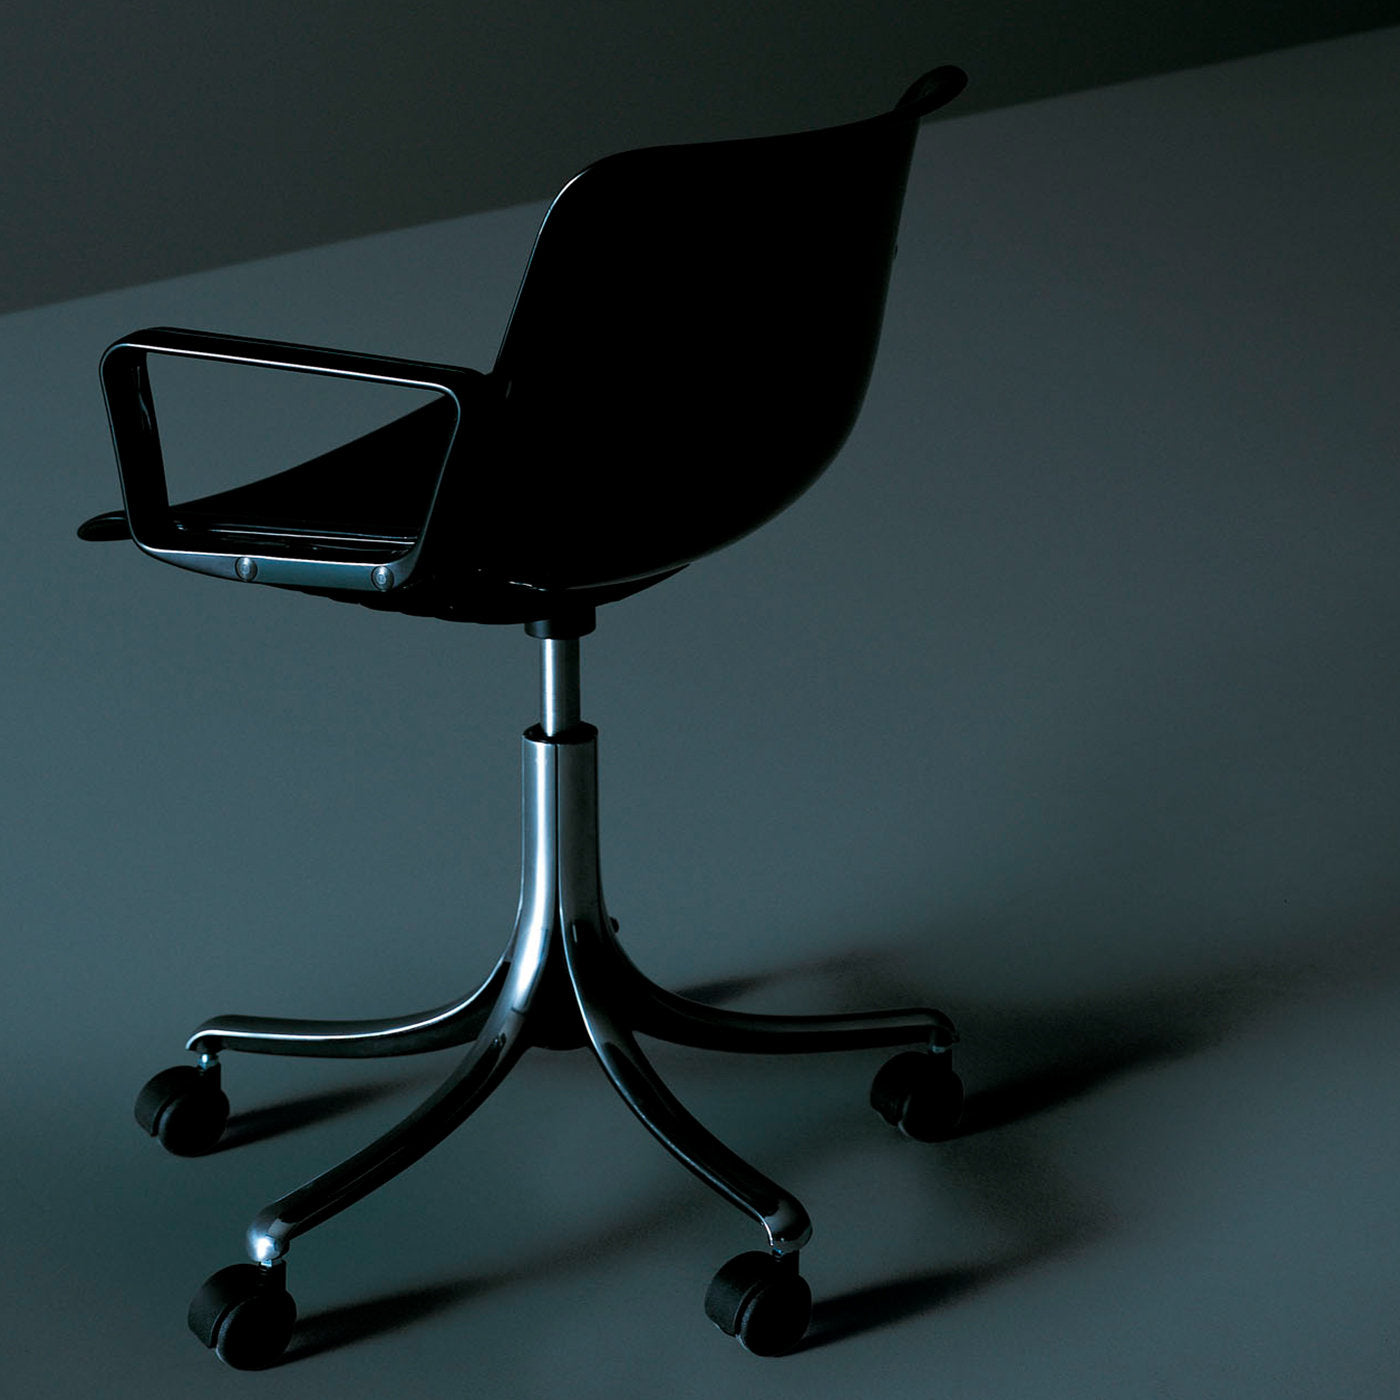 Modus Black Caster Chair with Armrests by Centro Progetti Tecno - Alternative view 4